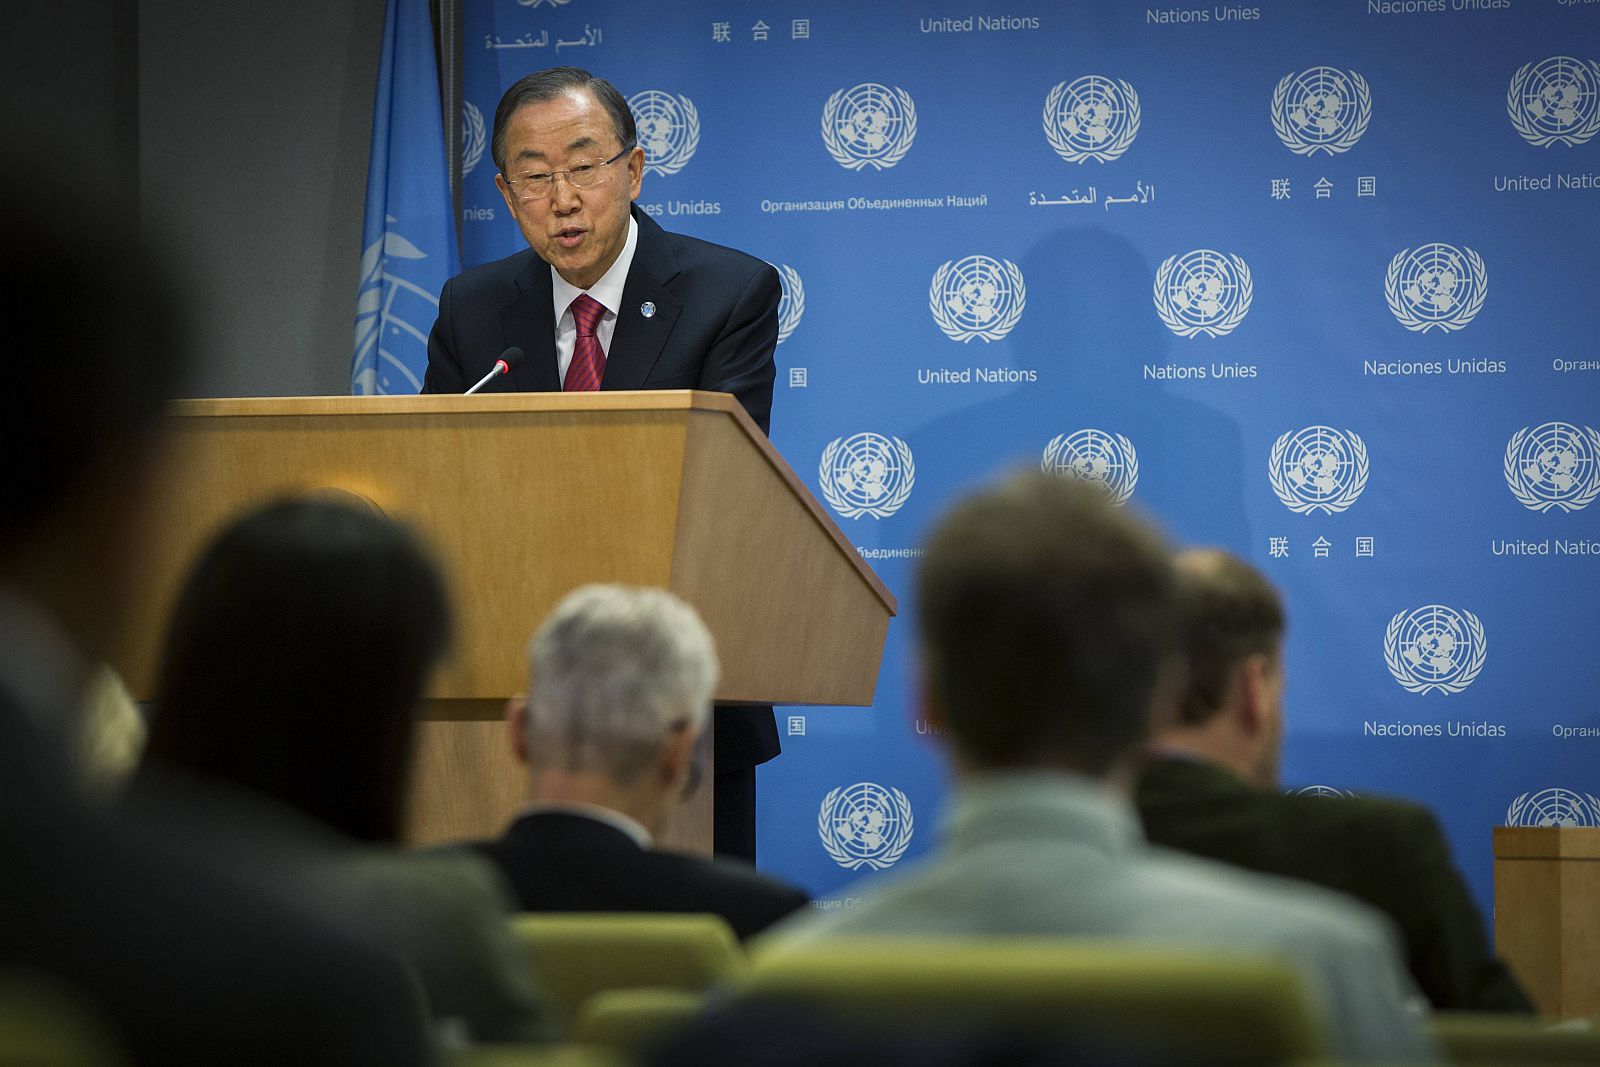 U.N. Secretary General Ban speaks during a news conference at the United Nations headquarters in New York